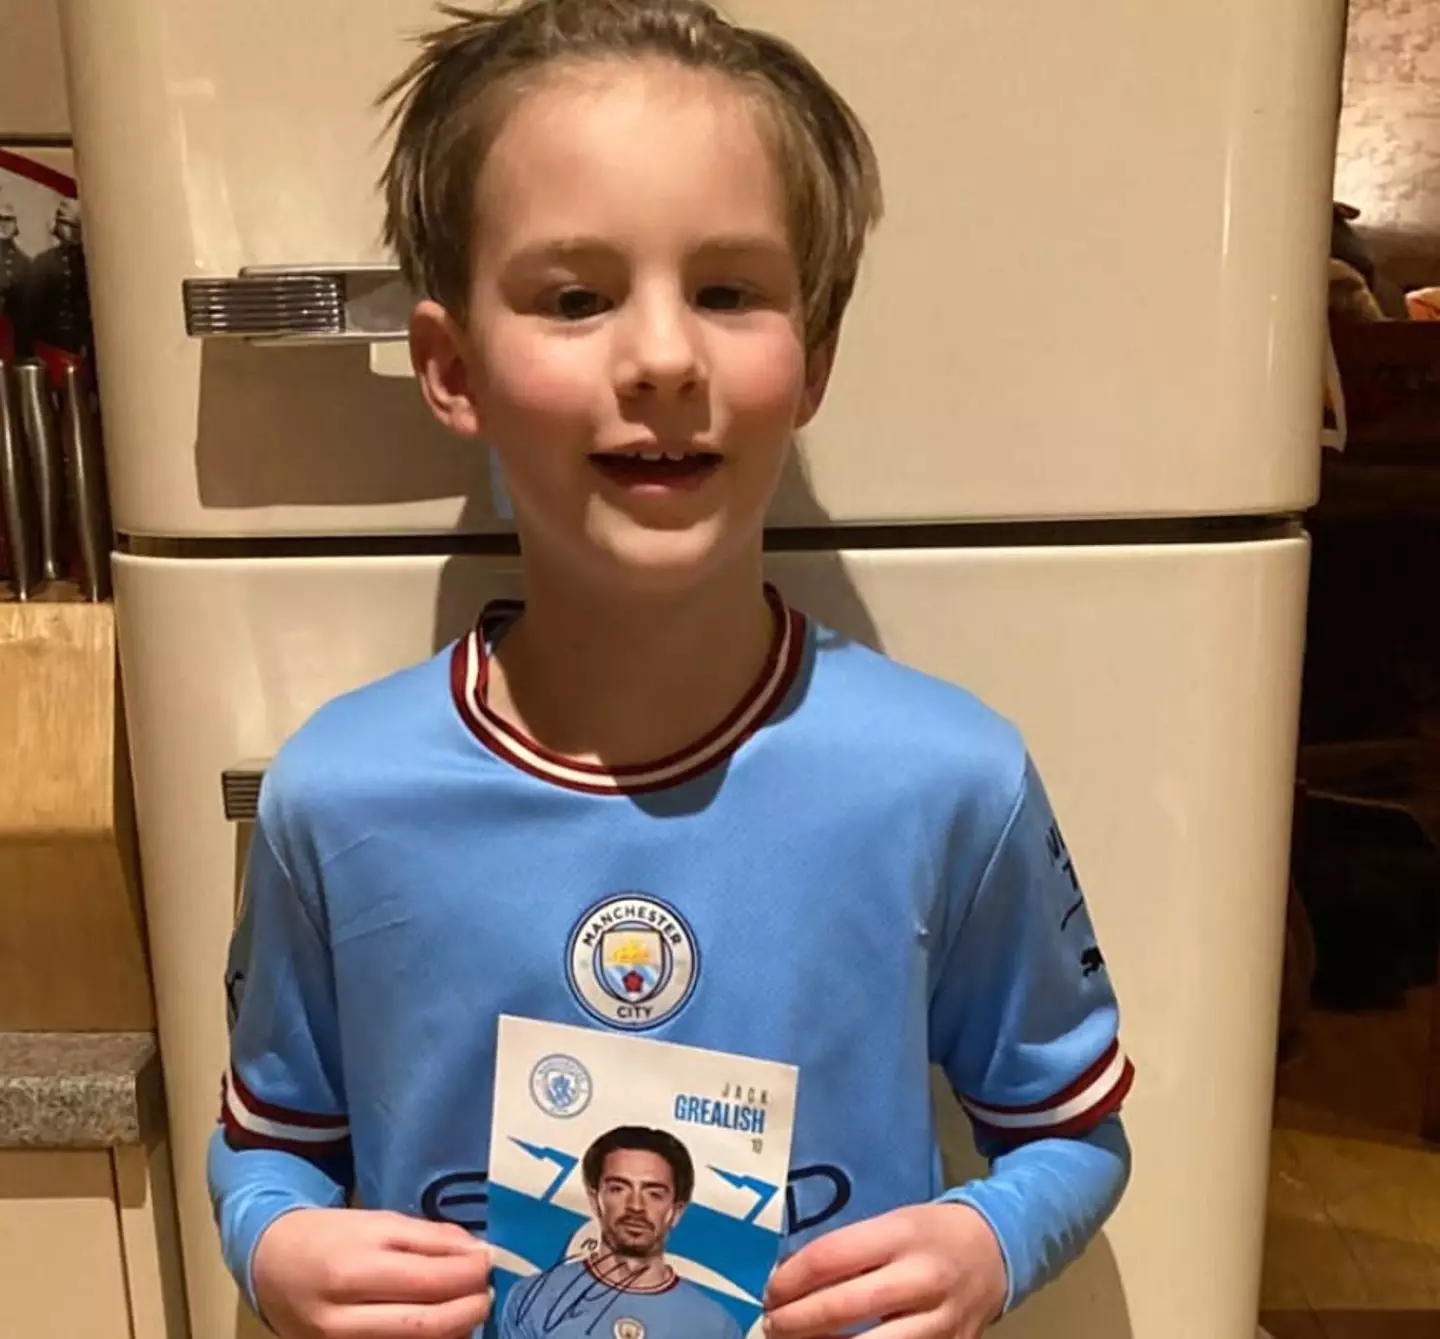 10-year-old Ralph is a huge fan of Jack Grealish.